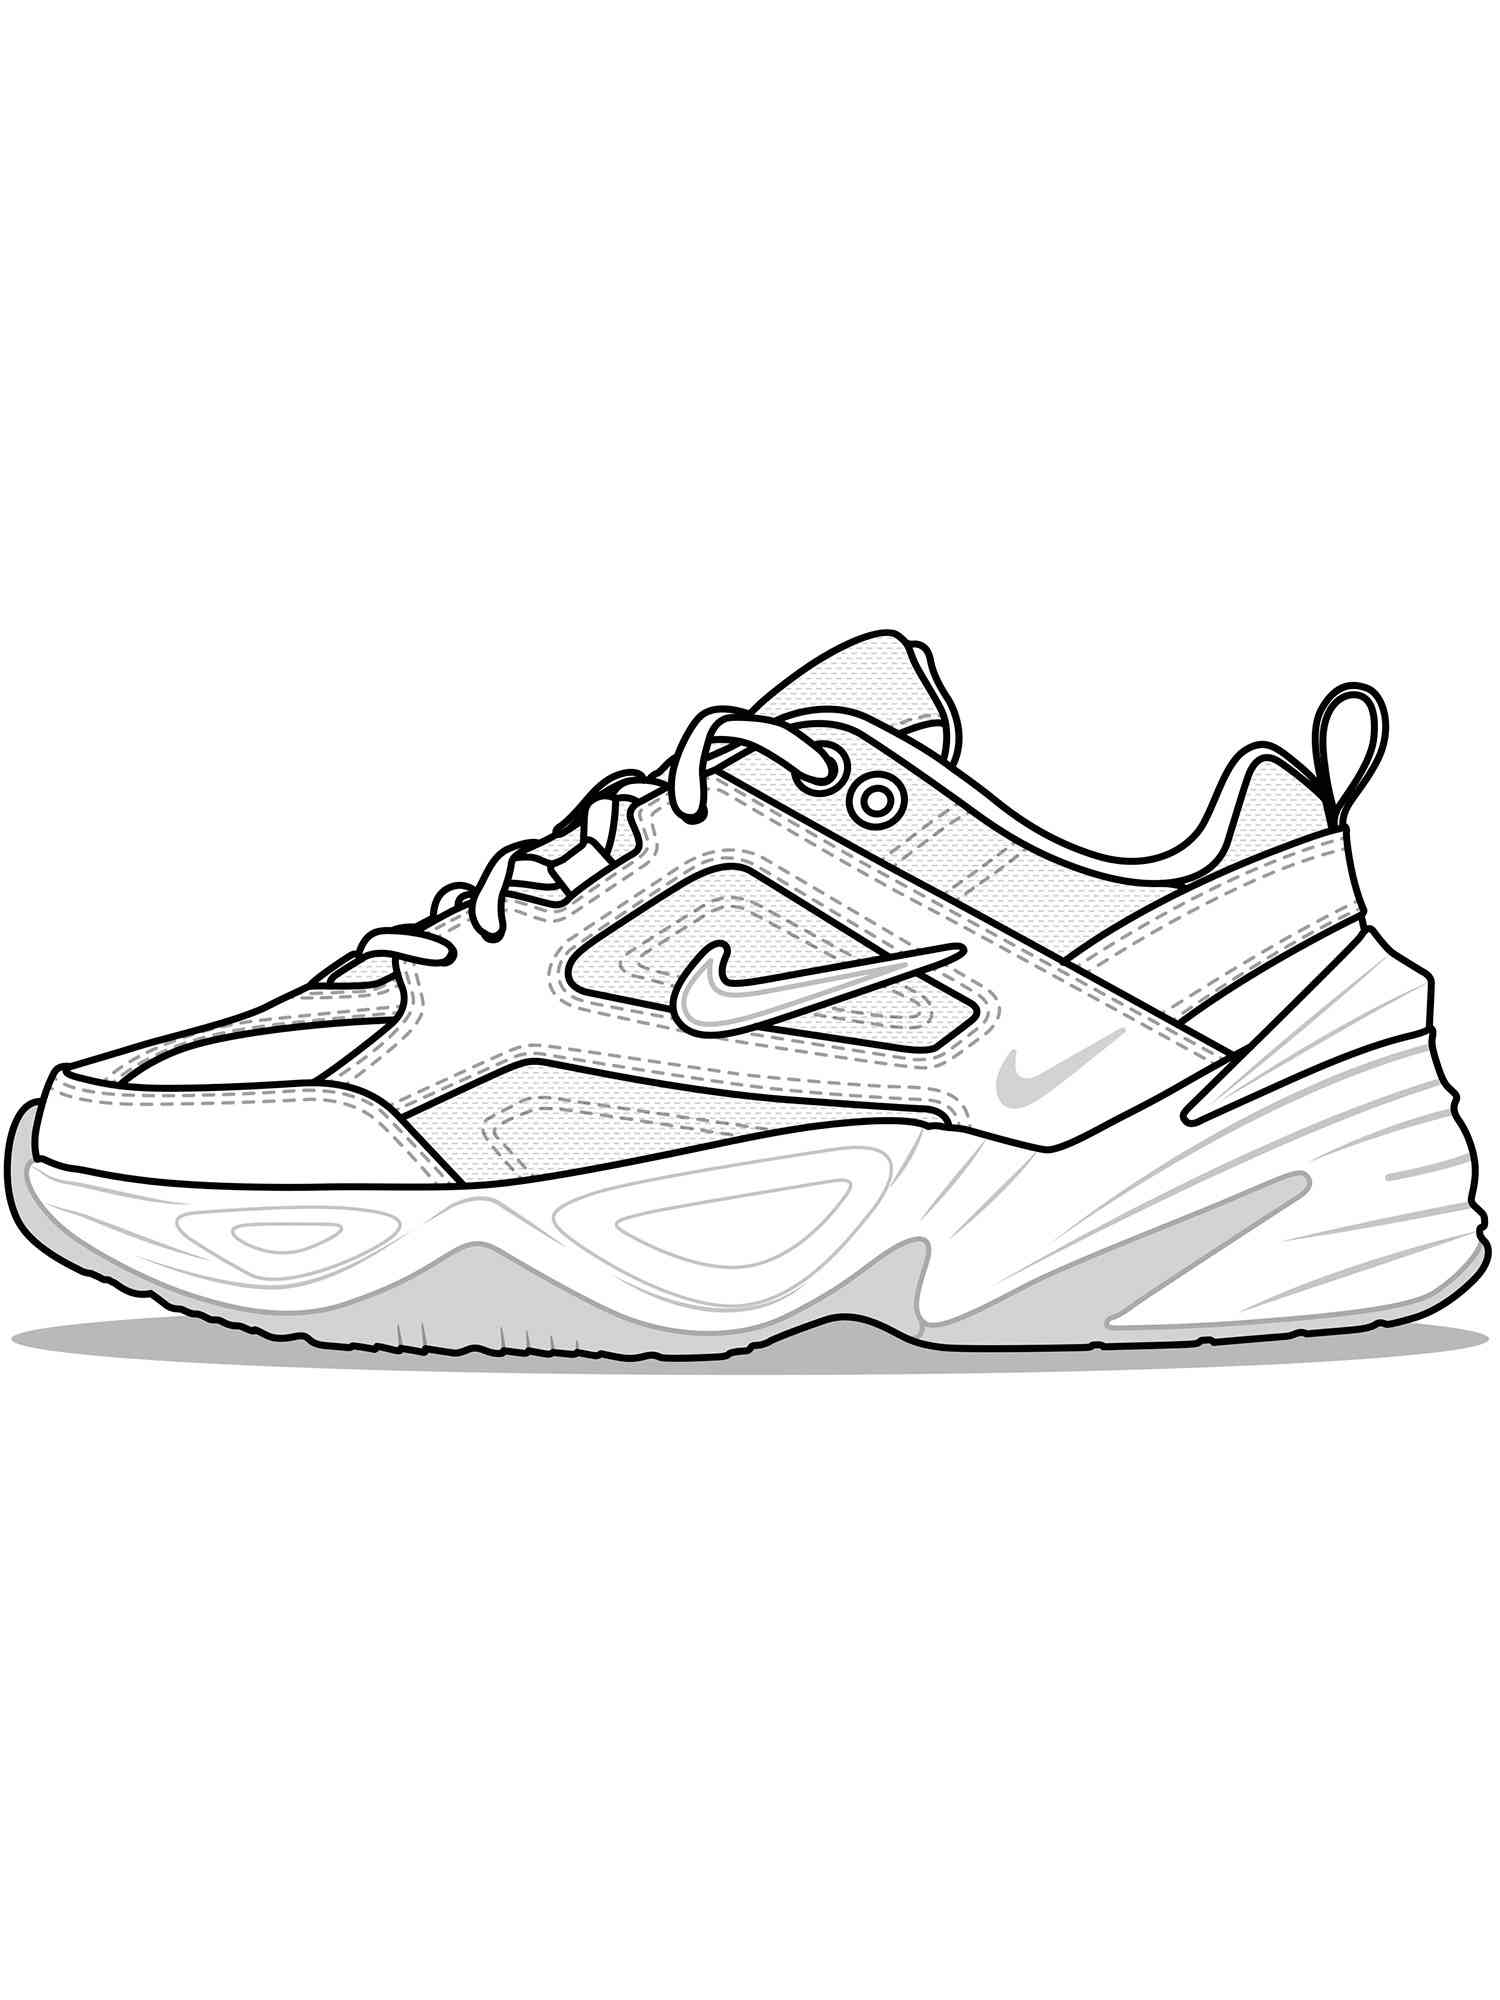 Nike coloring pages